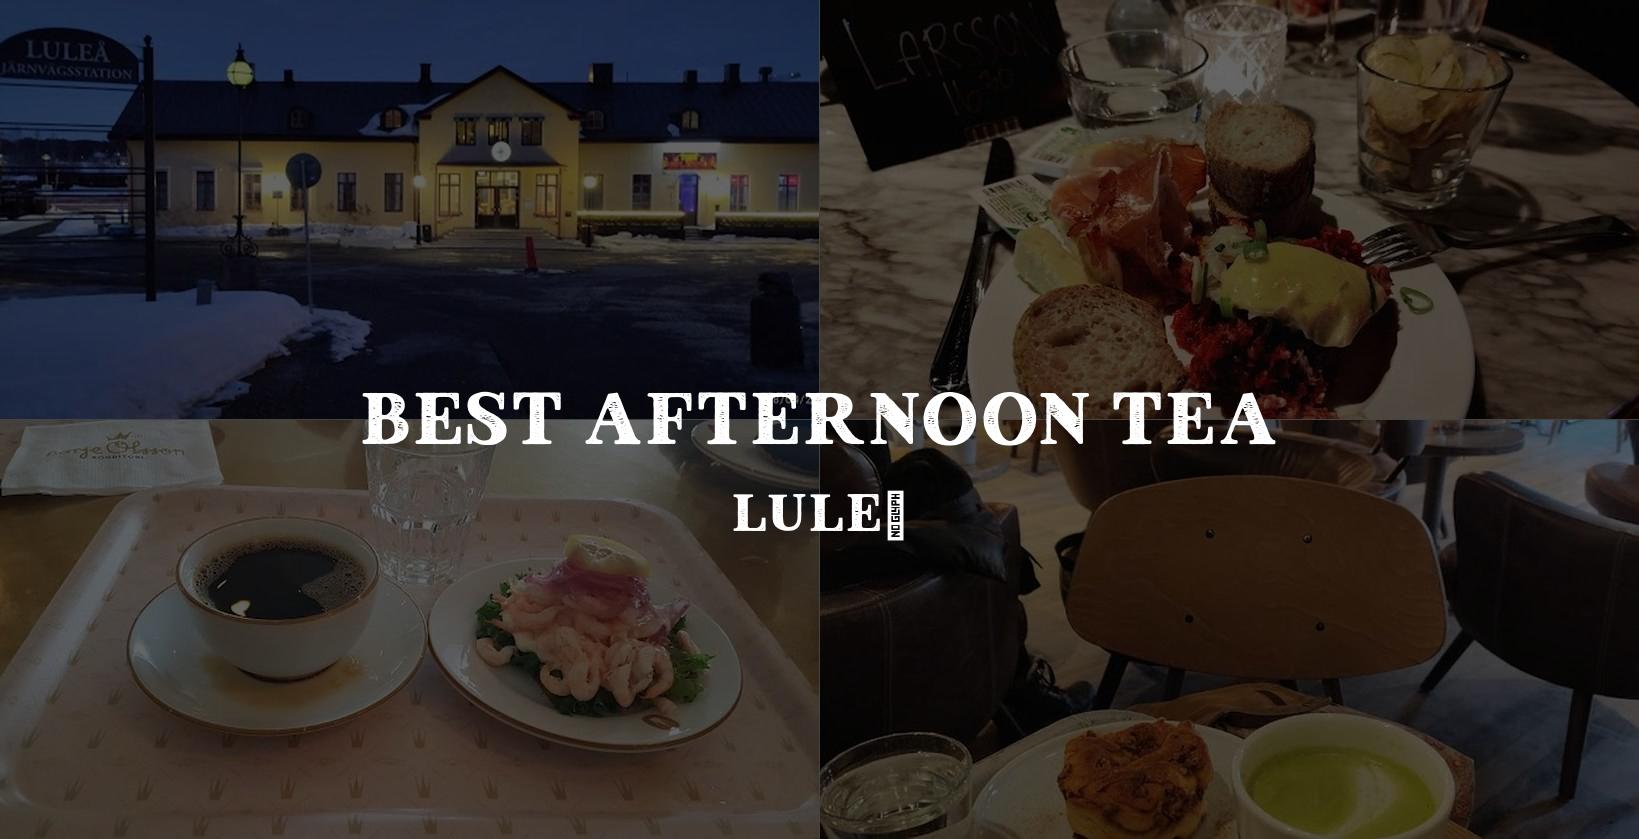 Choosing the right spot for afternoon tea in Luleå